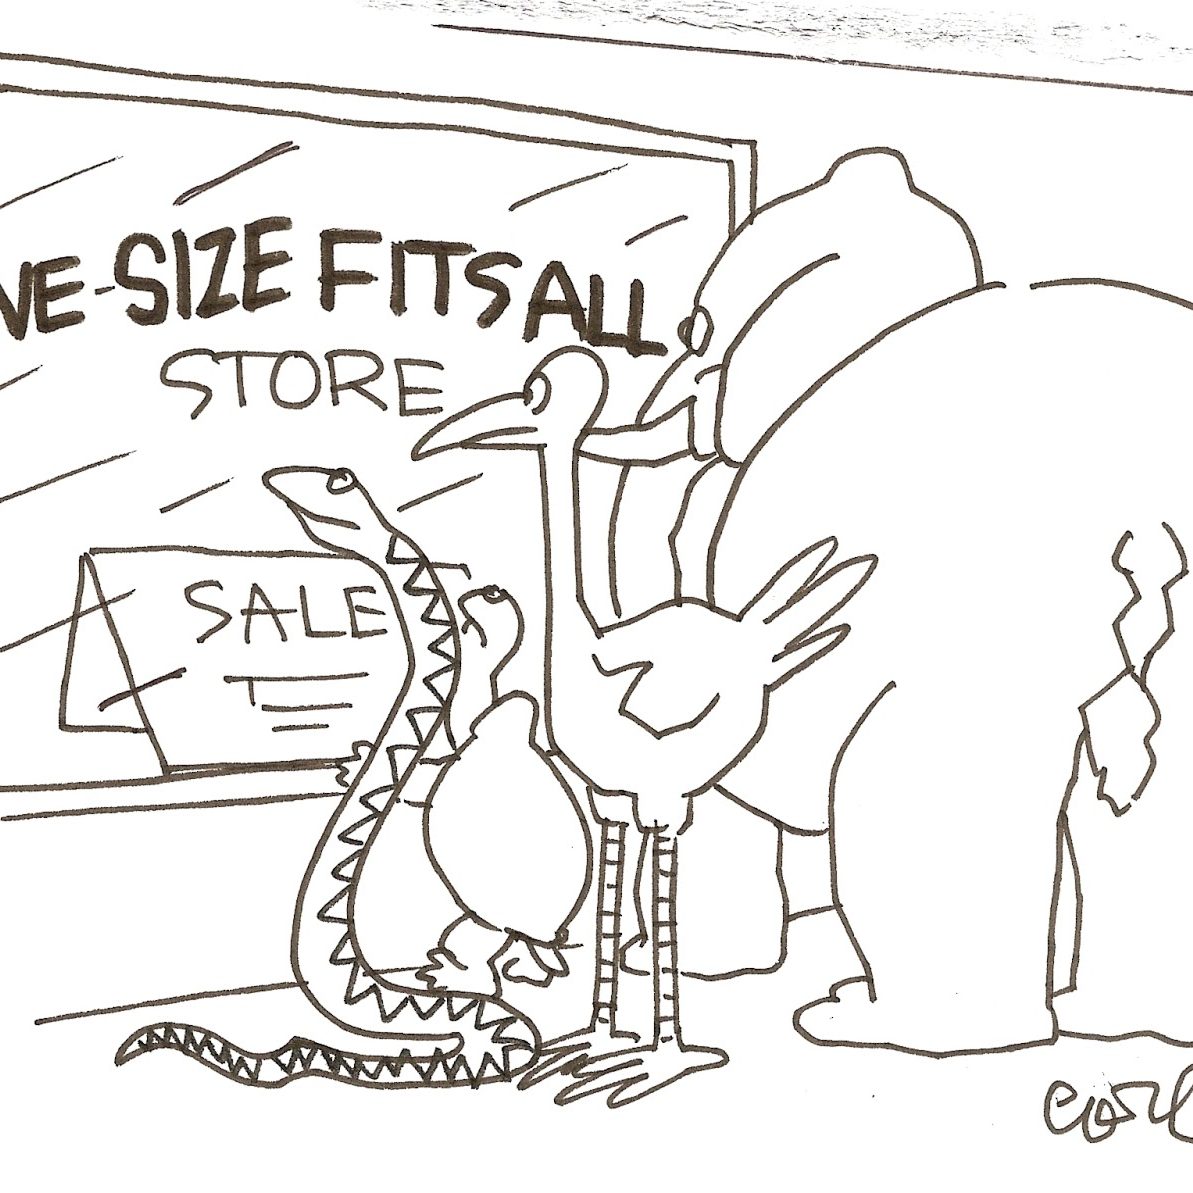 Customer Service: One Size Does NOT Fit All